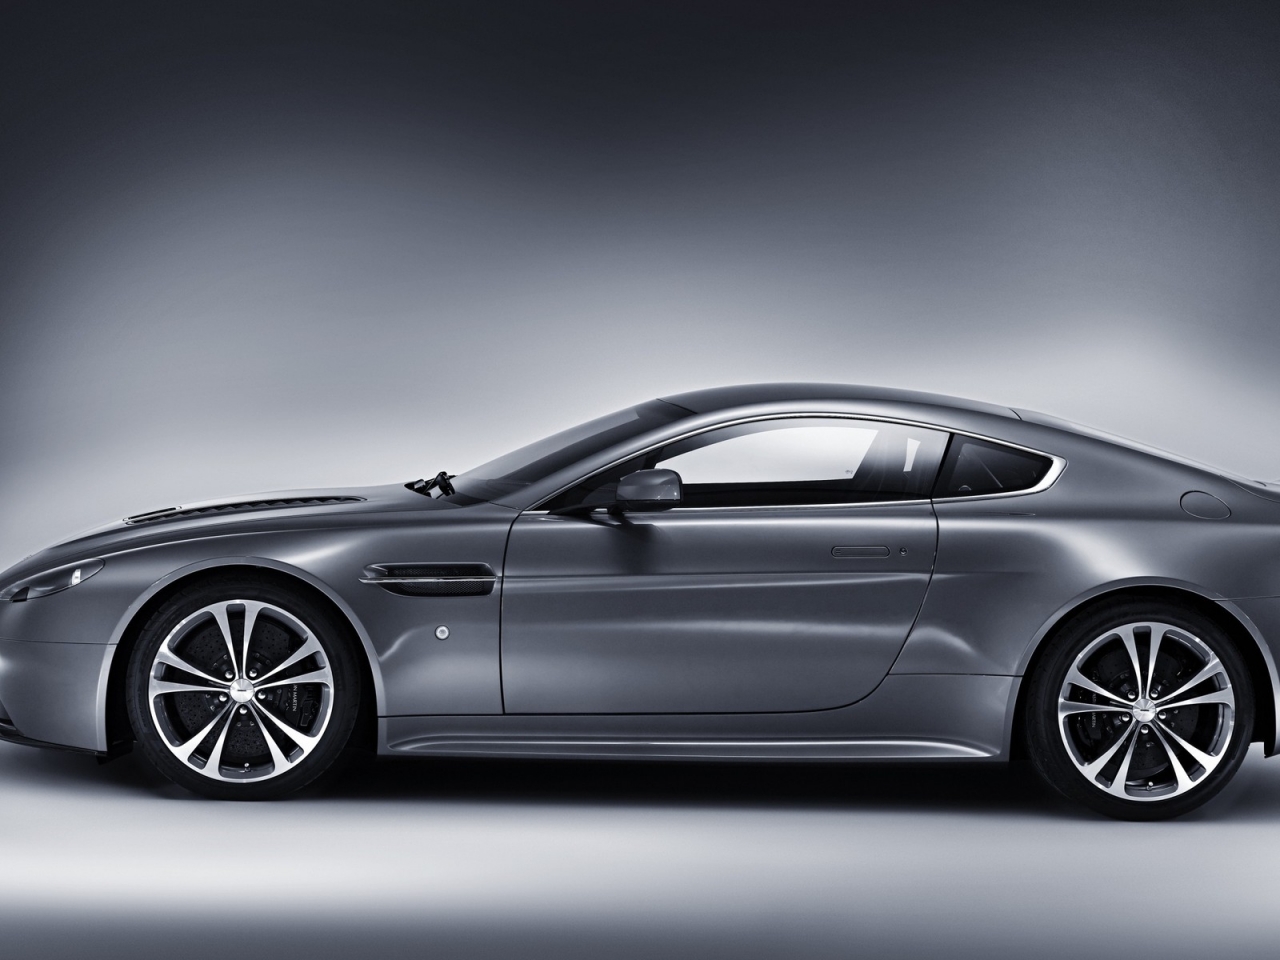 Aston Martin V12 Vantage Front View for 1280 x 960 resolution